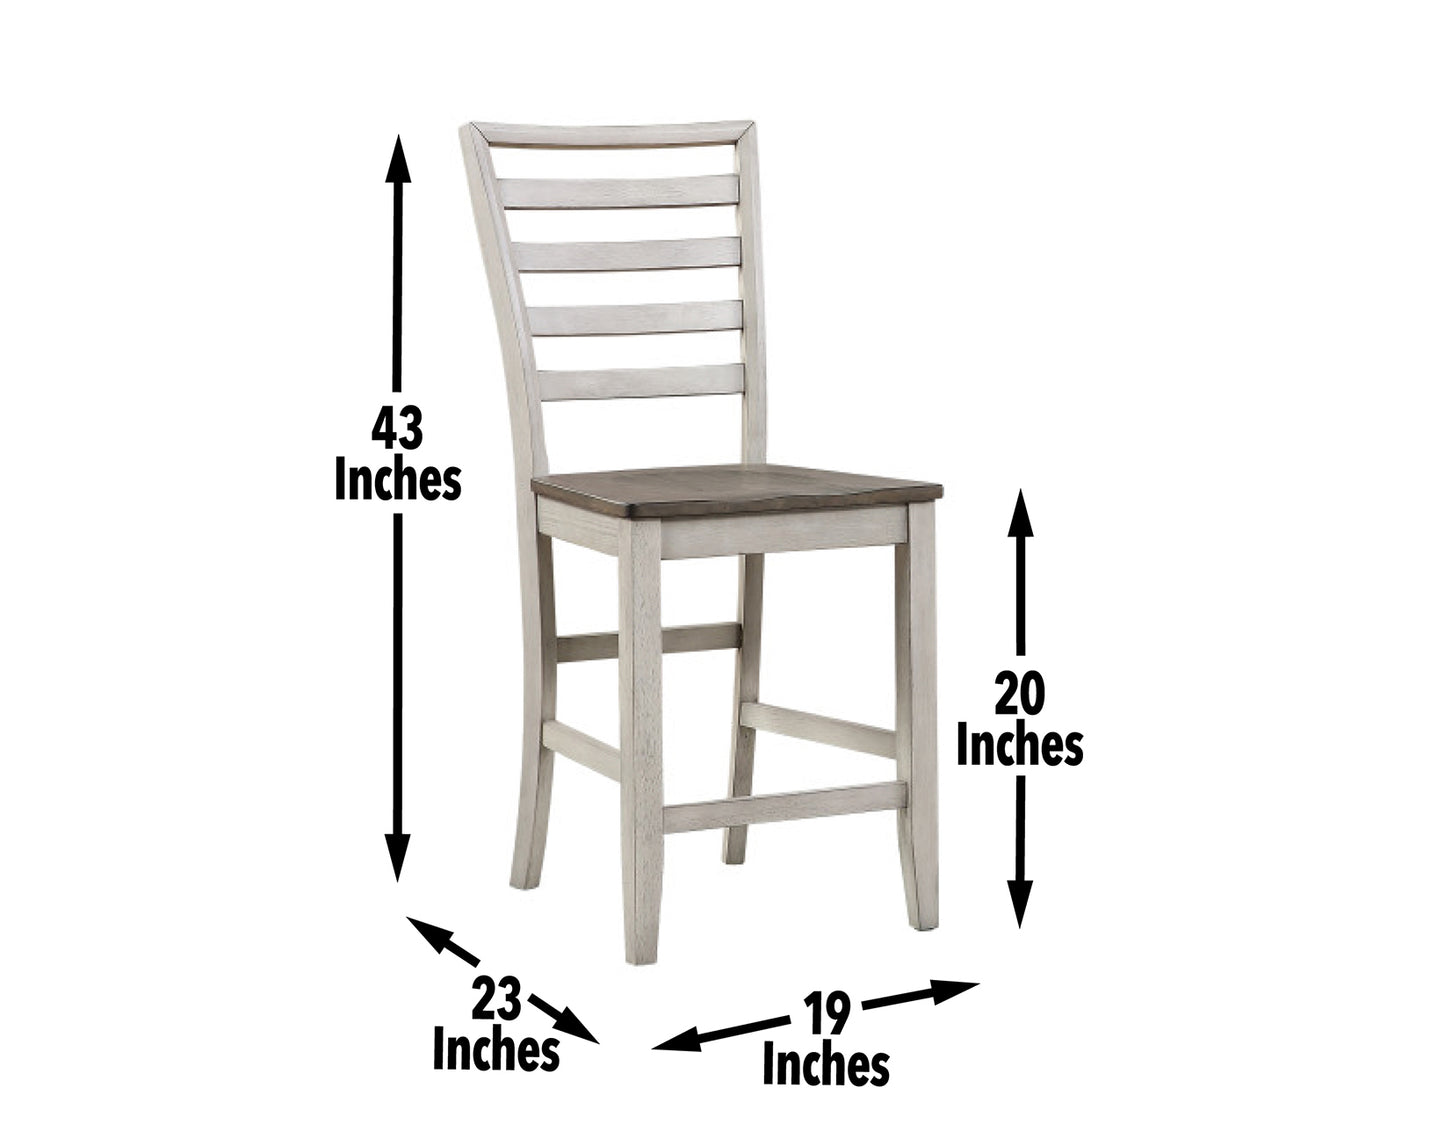 Abacus 5-Piece Counter Drop-Leaf Dining Set
(Table & 4 Chairs)